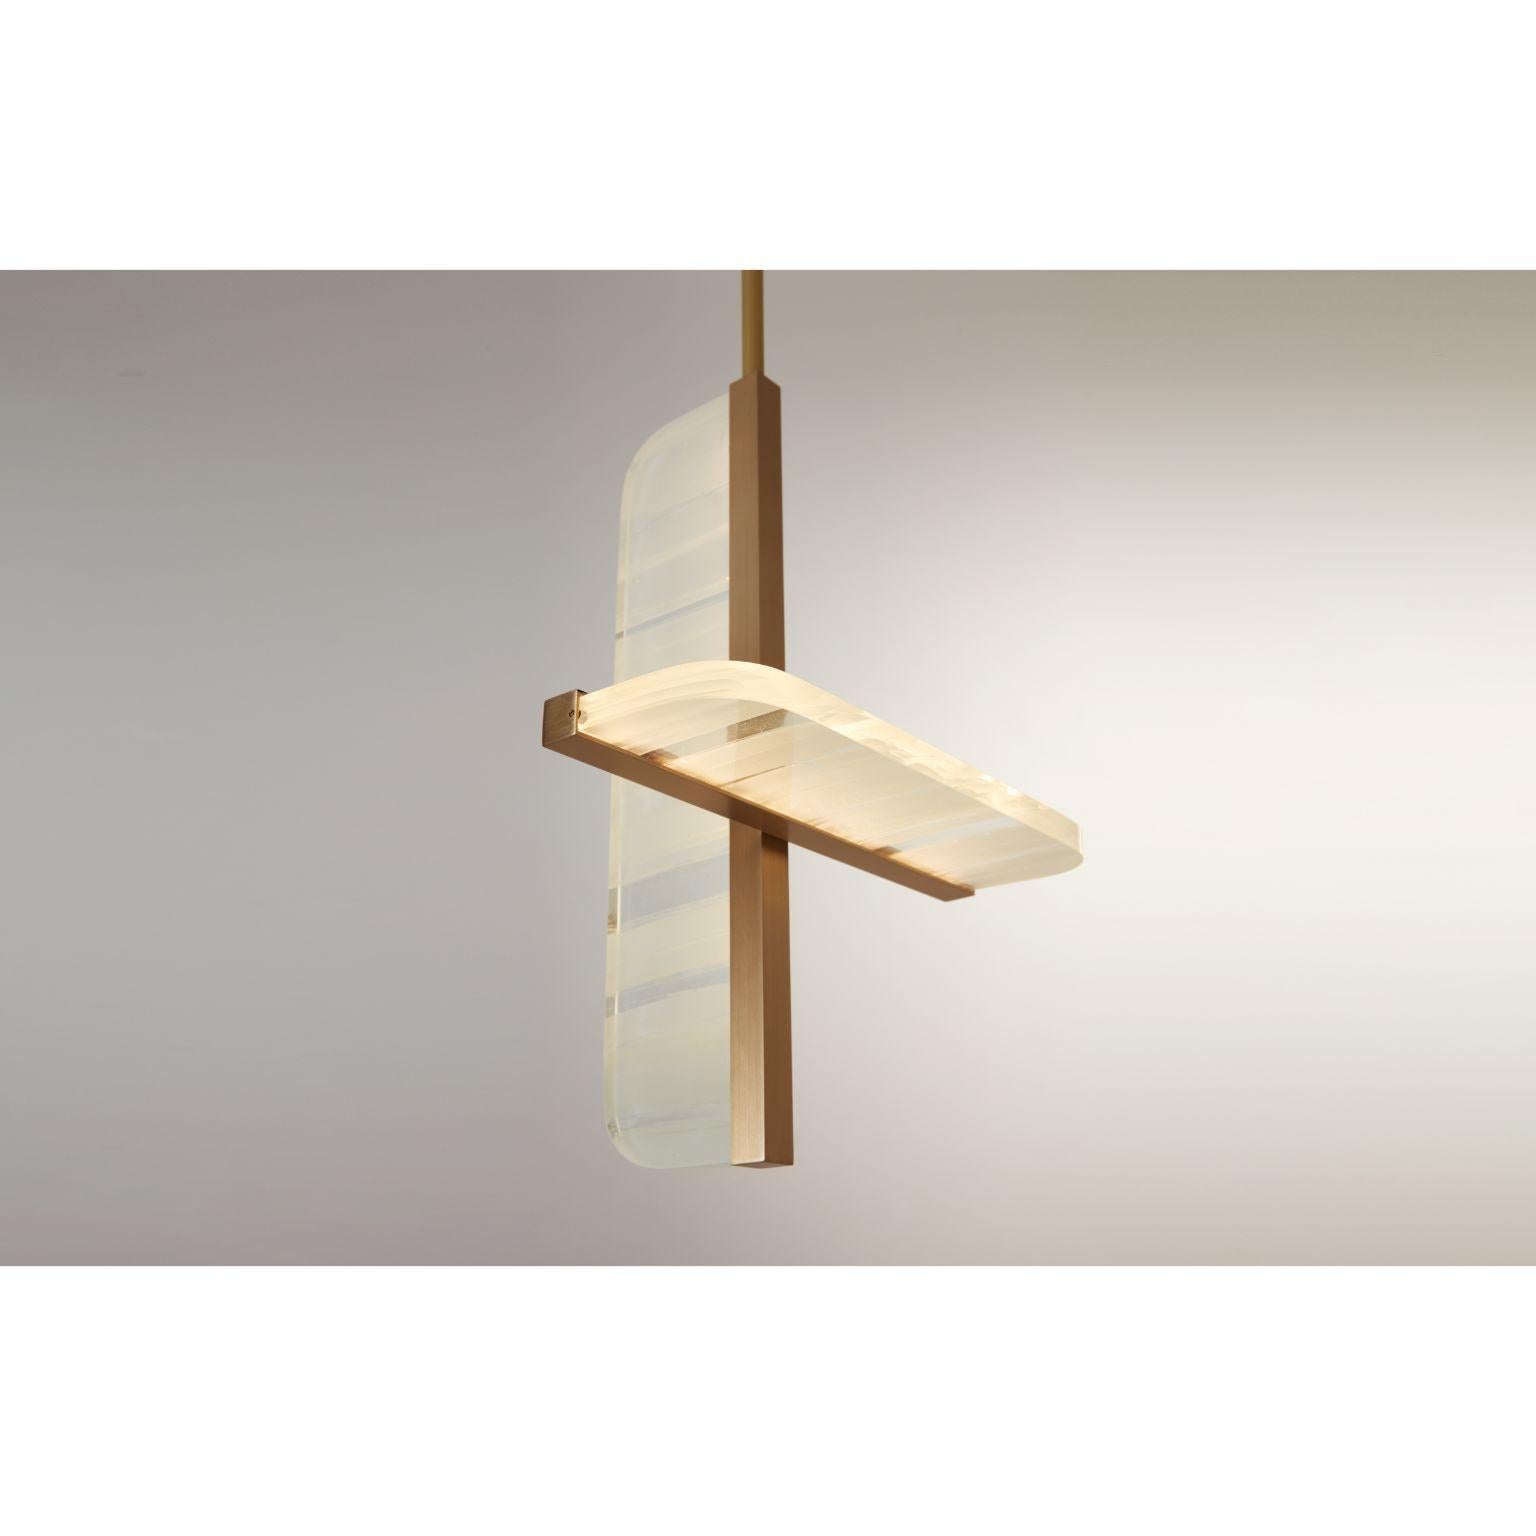 Agate Suspension by Mydriaz
Dimensions: W 34.5 x D 28.5 H 46.5 cm
Materials: Brass and Glass

Our products are handmade in our workshop. Dimensions and finishes may vary slightly from one model to another dimensions can be customized certain